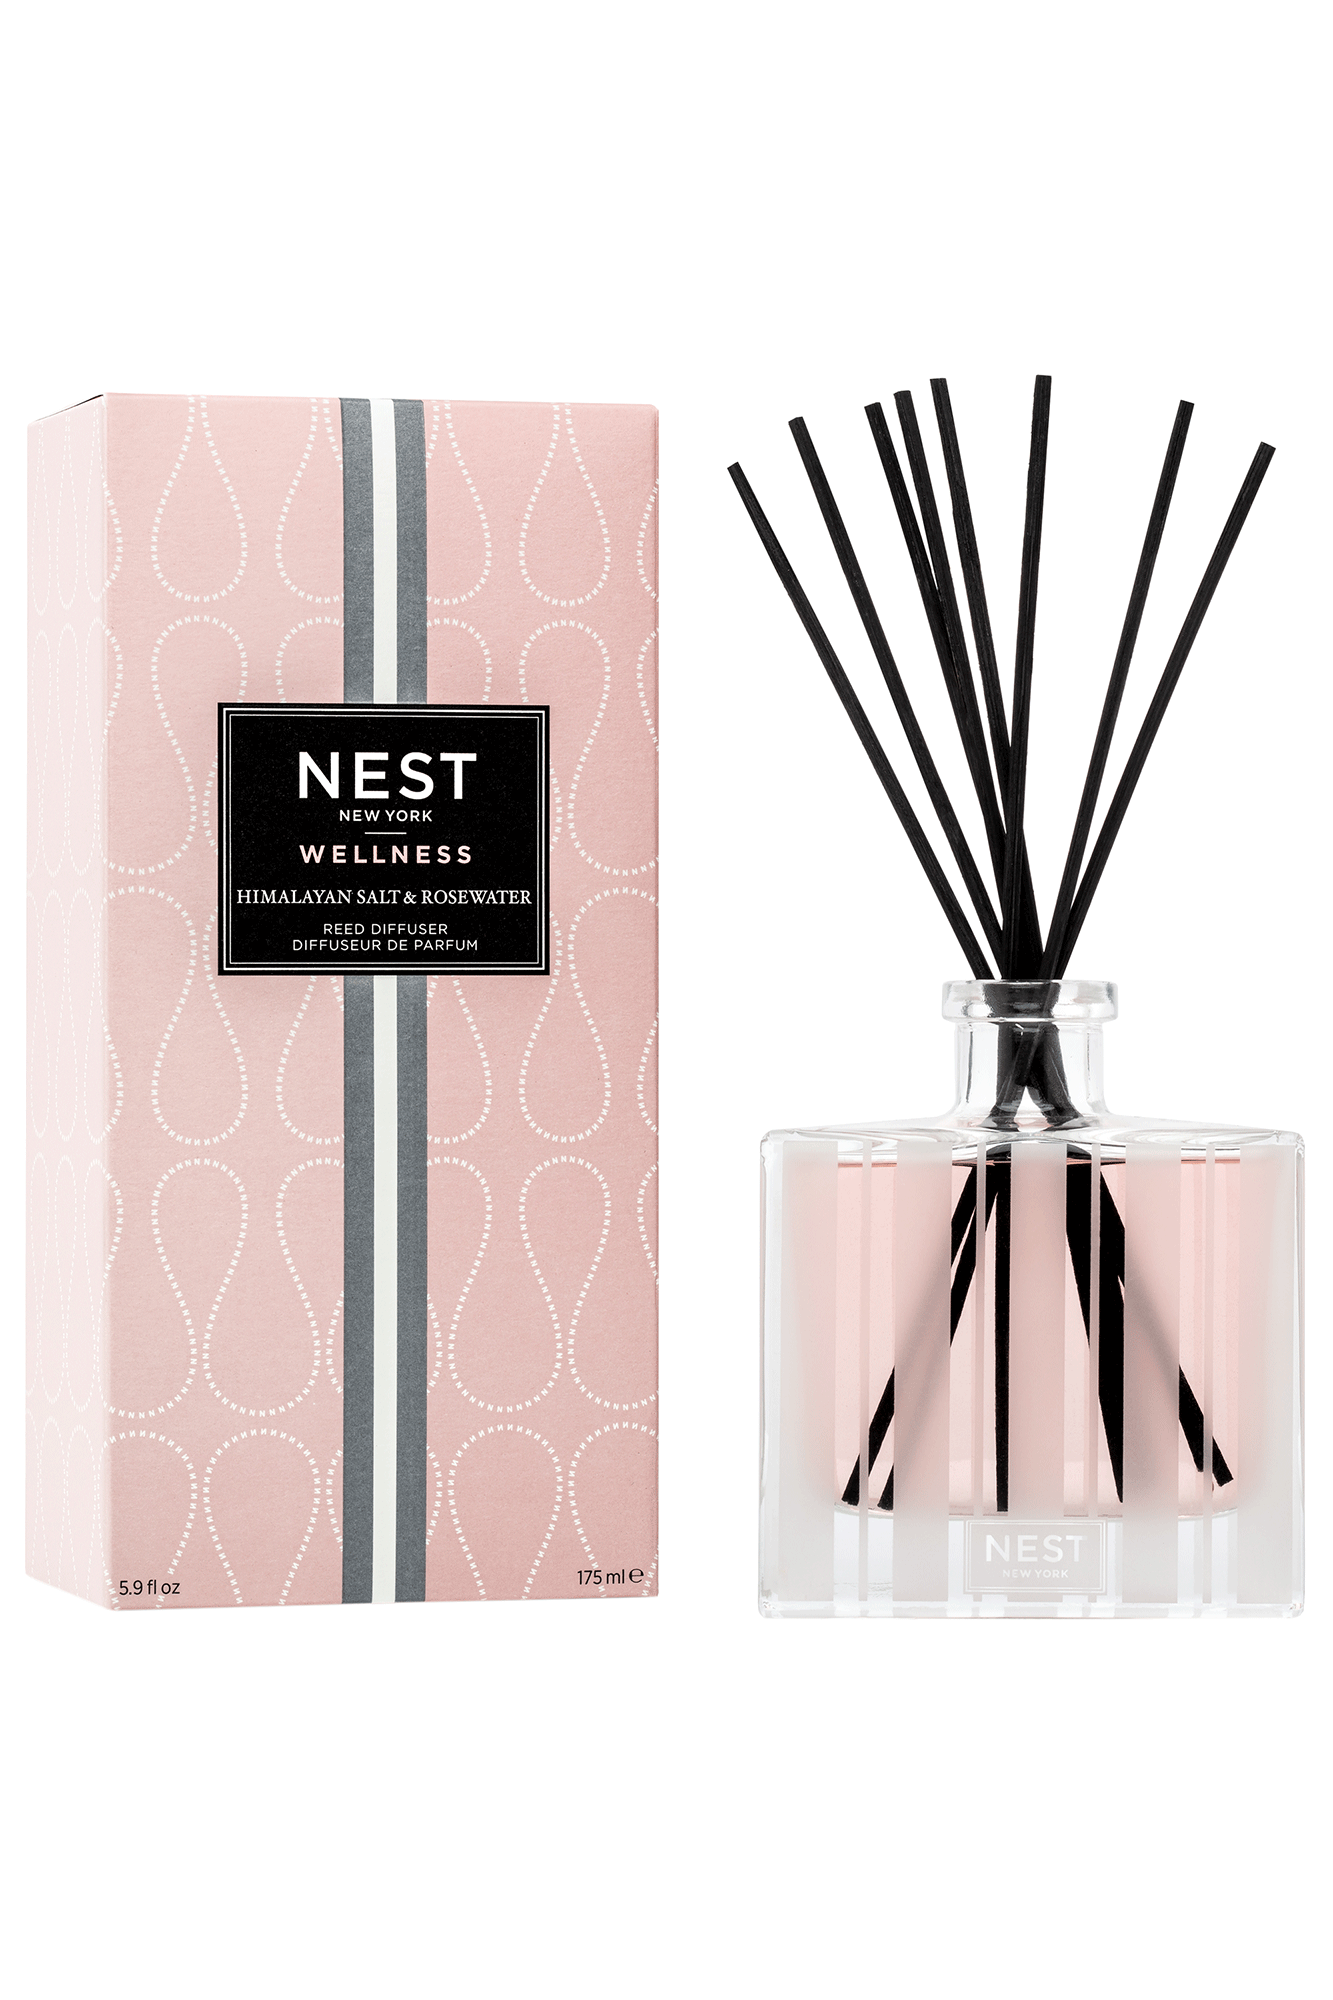 Enjoy a calming atmosphere with the Himalayan Salt & Rosewater Reed Diffuser from Nest. Infused with notes of rosewater, geranium, salted amber, and white woods, this fragrance will help to ease your mind and soothe your spirit.